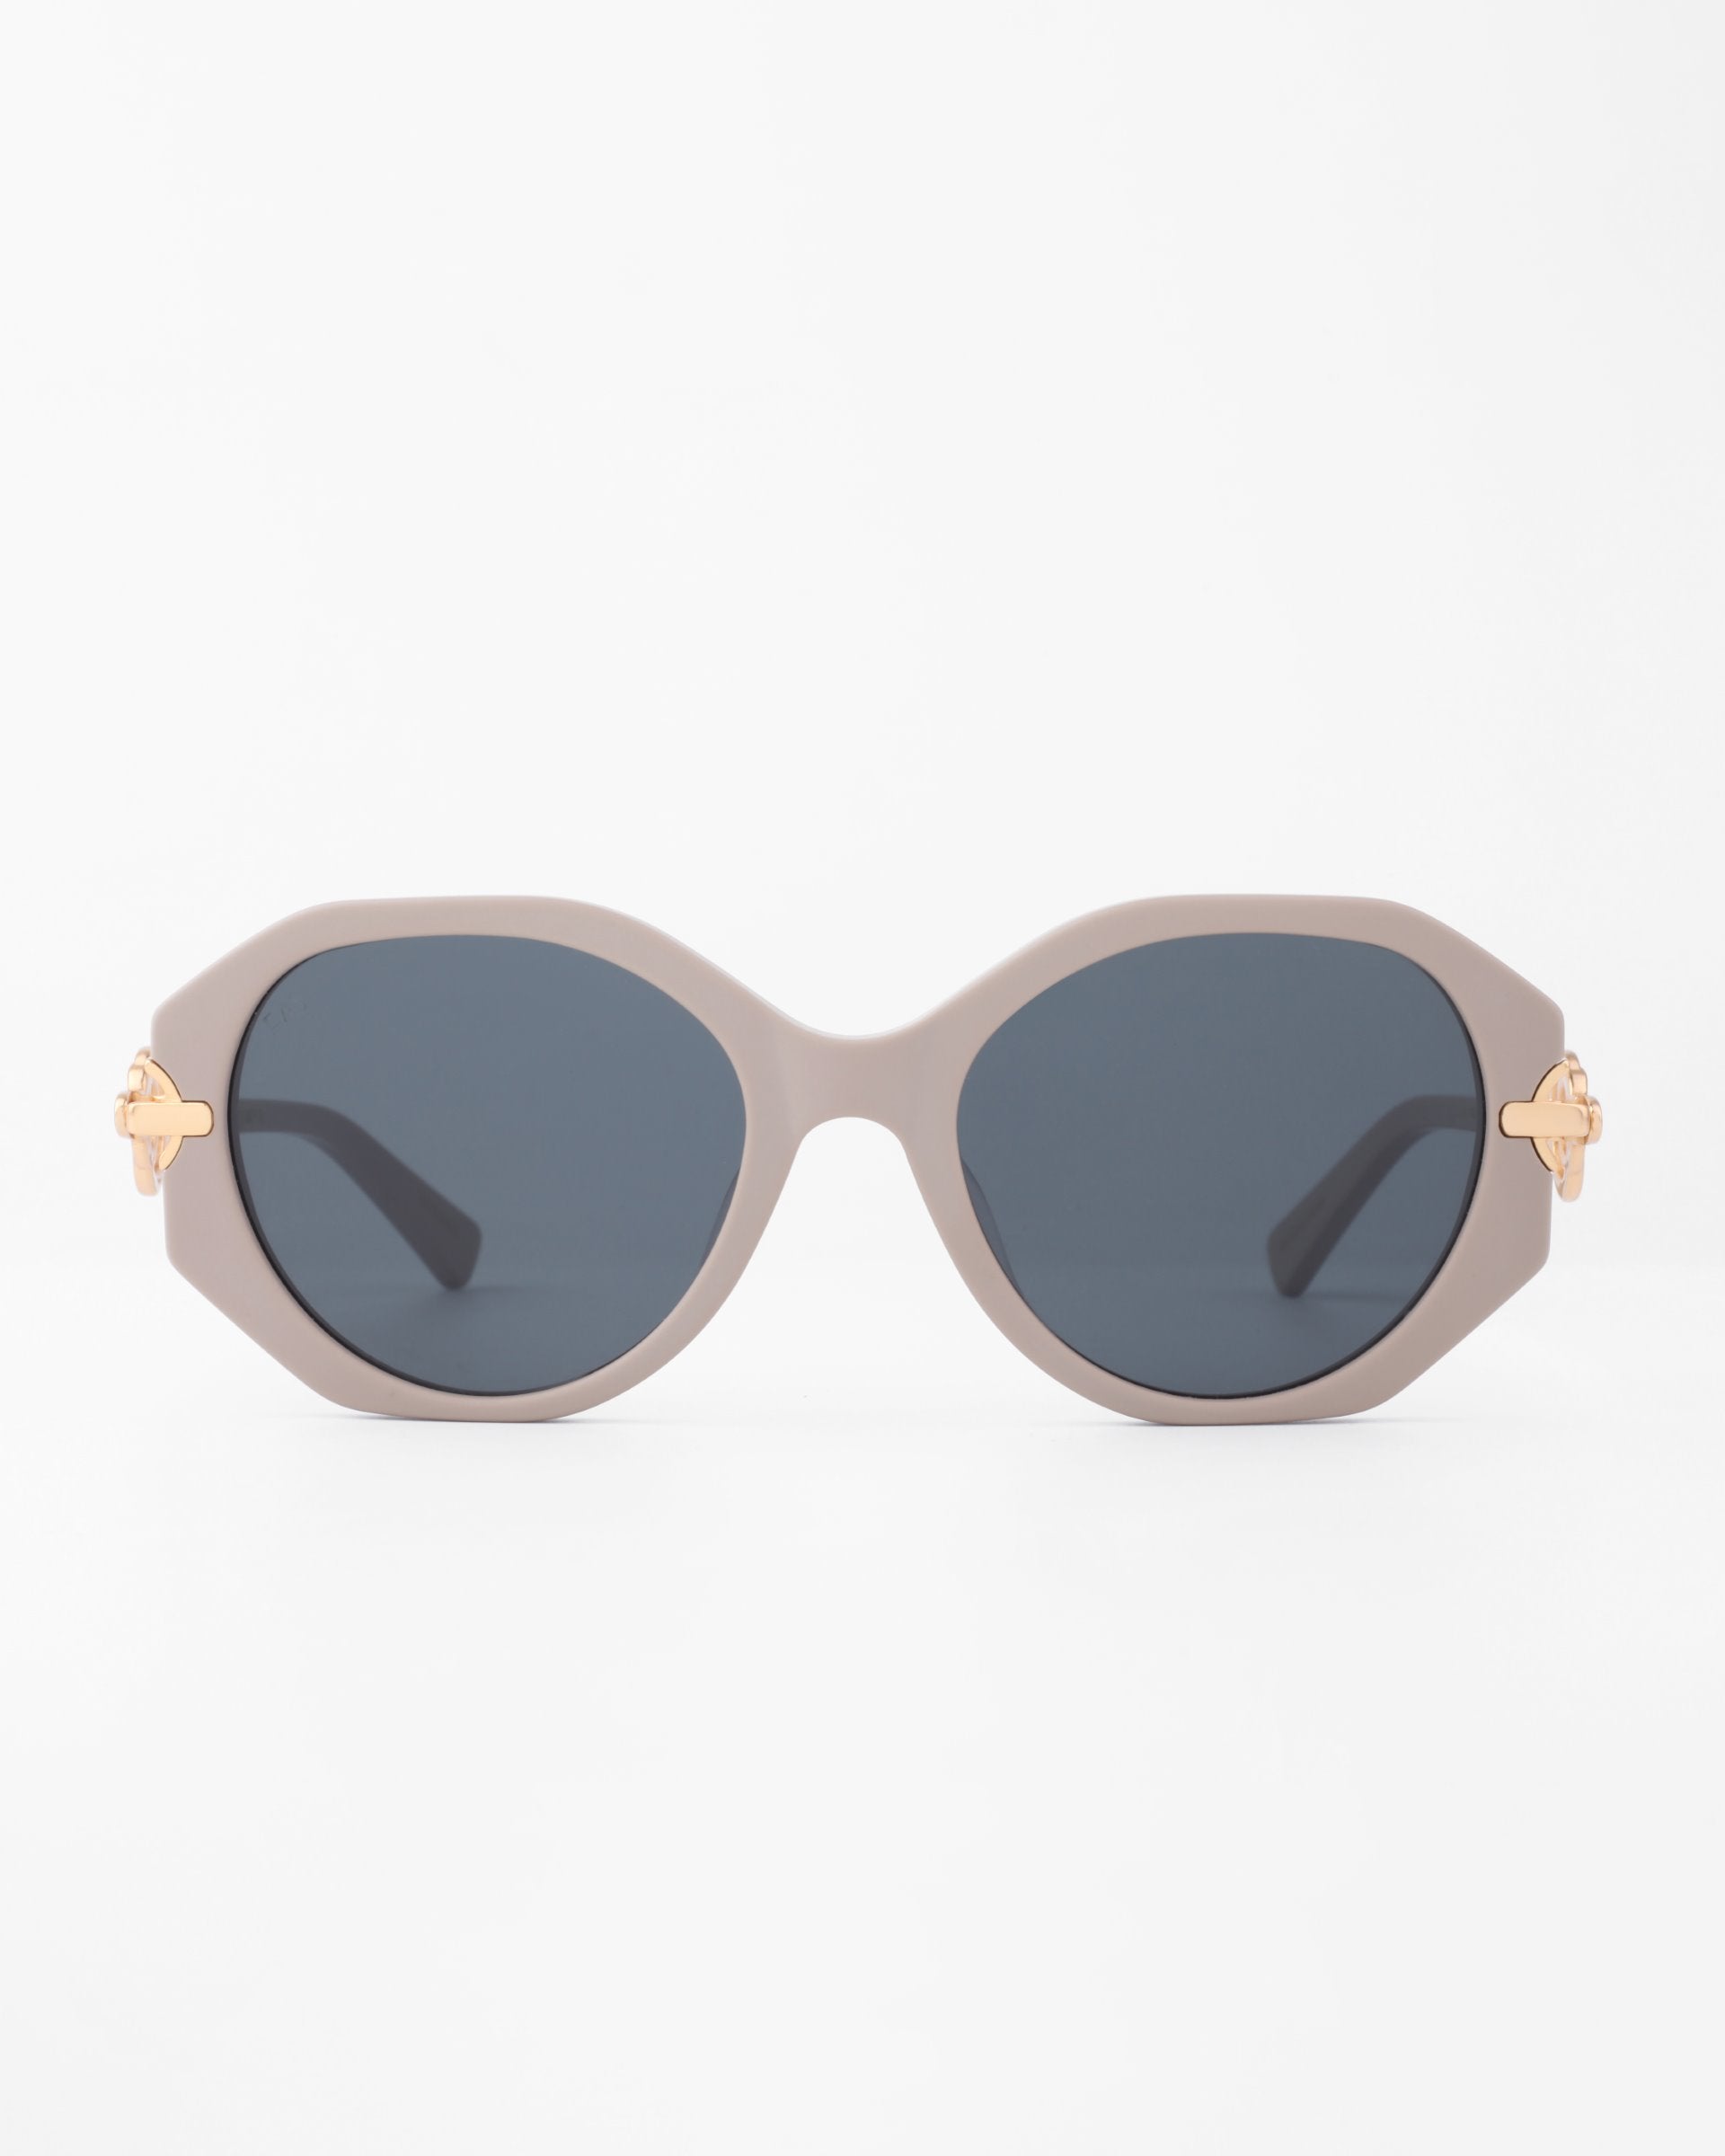 A pair of stylish Seaside sunglasses by For Art's Sake® with dark oval, shatter-resistant lenses and a light beige, handmade acetate frame. The temples feature gold-plated detailing near the hinges, adding a touch of elegance to the design. The background is solid white.